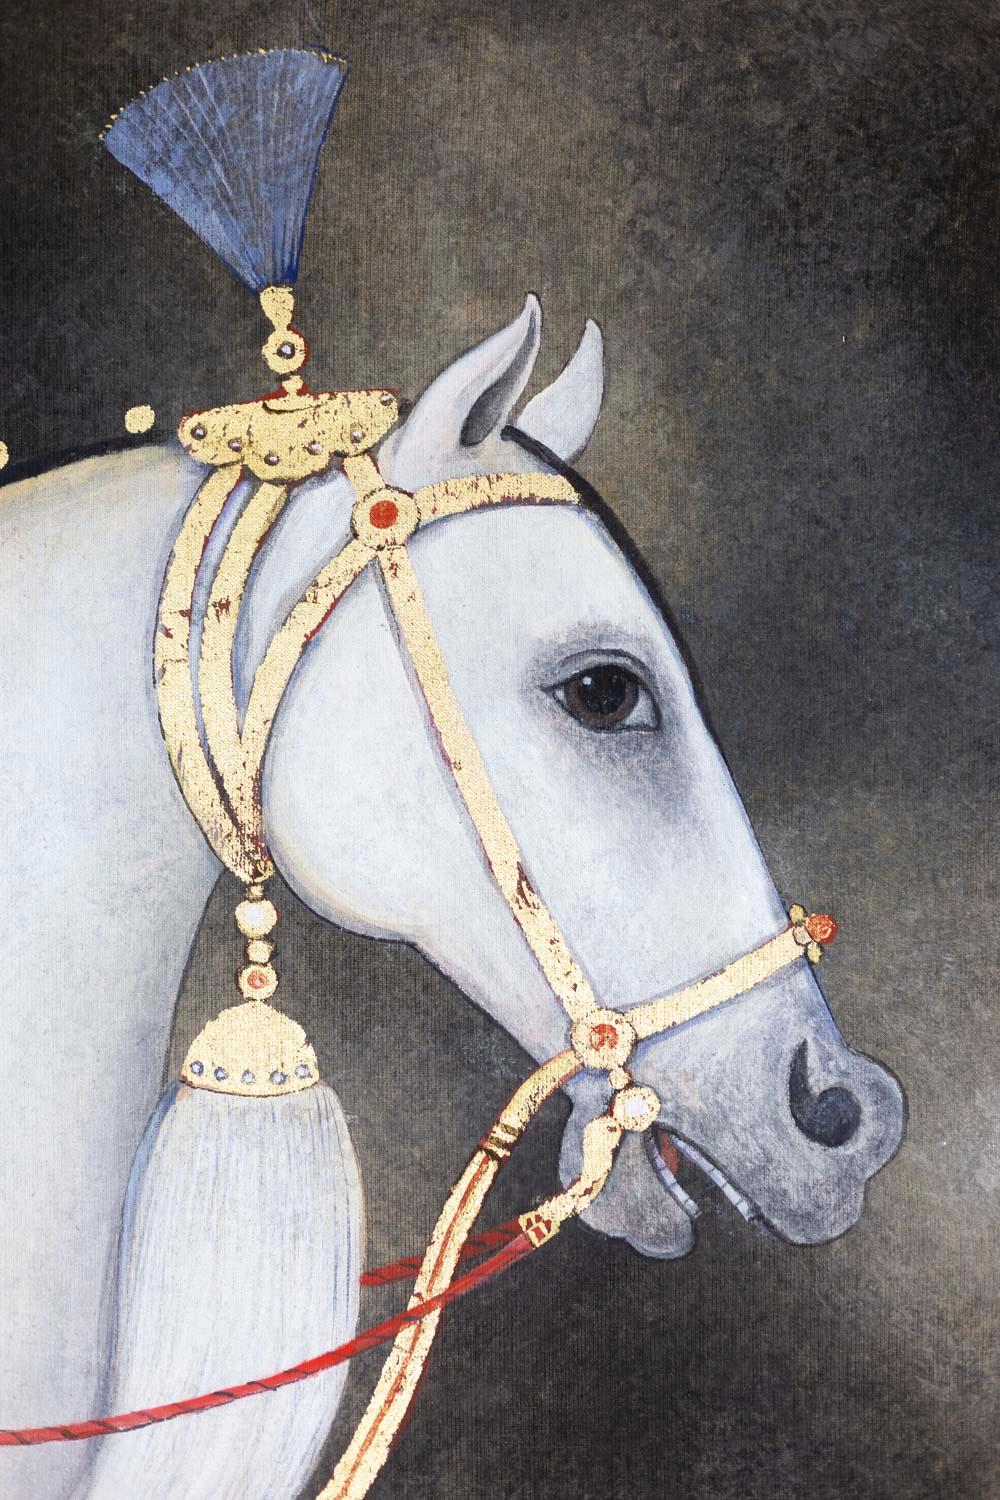 Painted canvas representing a saddled white horse with a golden and black saddle adorned with flowers. Gilt bit and mane. Red reins. Background in grey tones.

Linen raw canvas hand painted with natural pigments and gilt motifs realized with